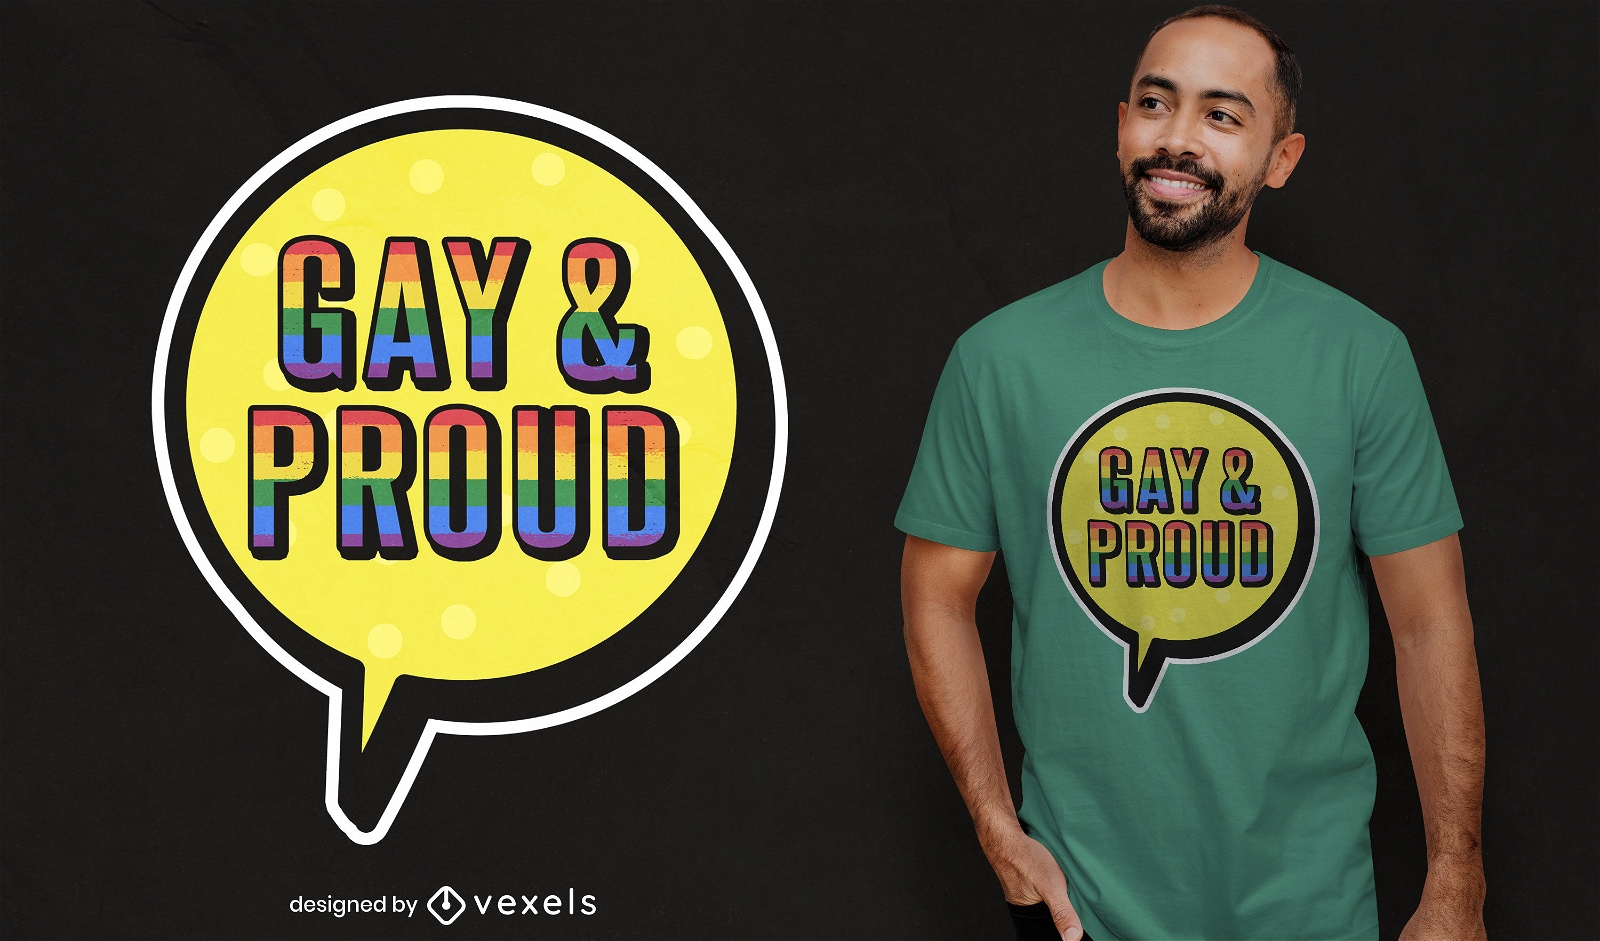 Gay and proud t-shirt design